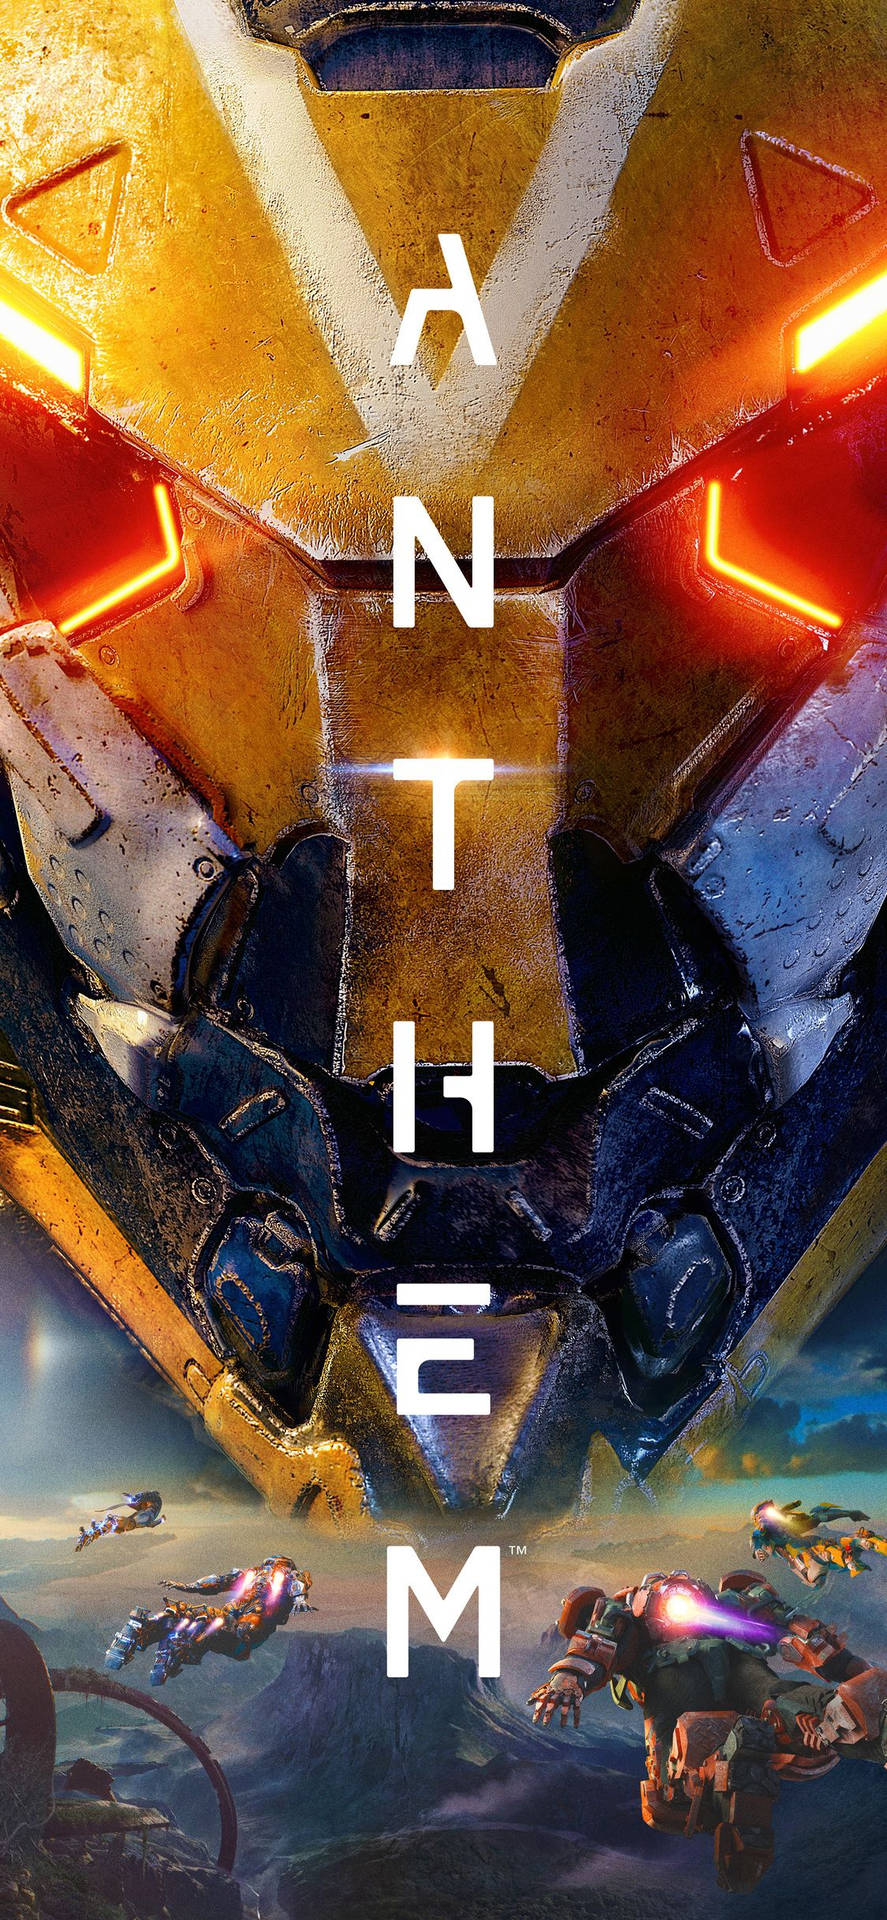 Hd Anthem Game Cover Background